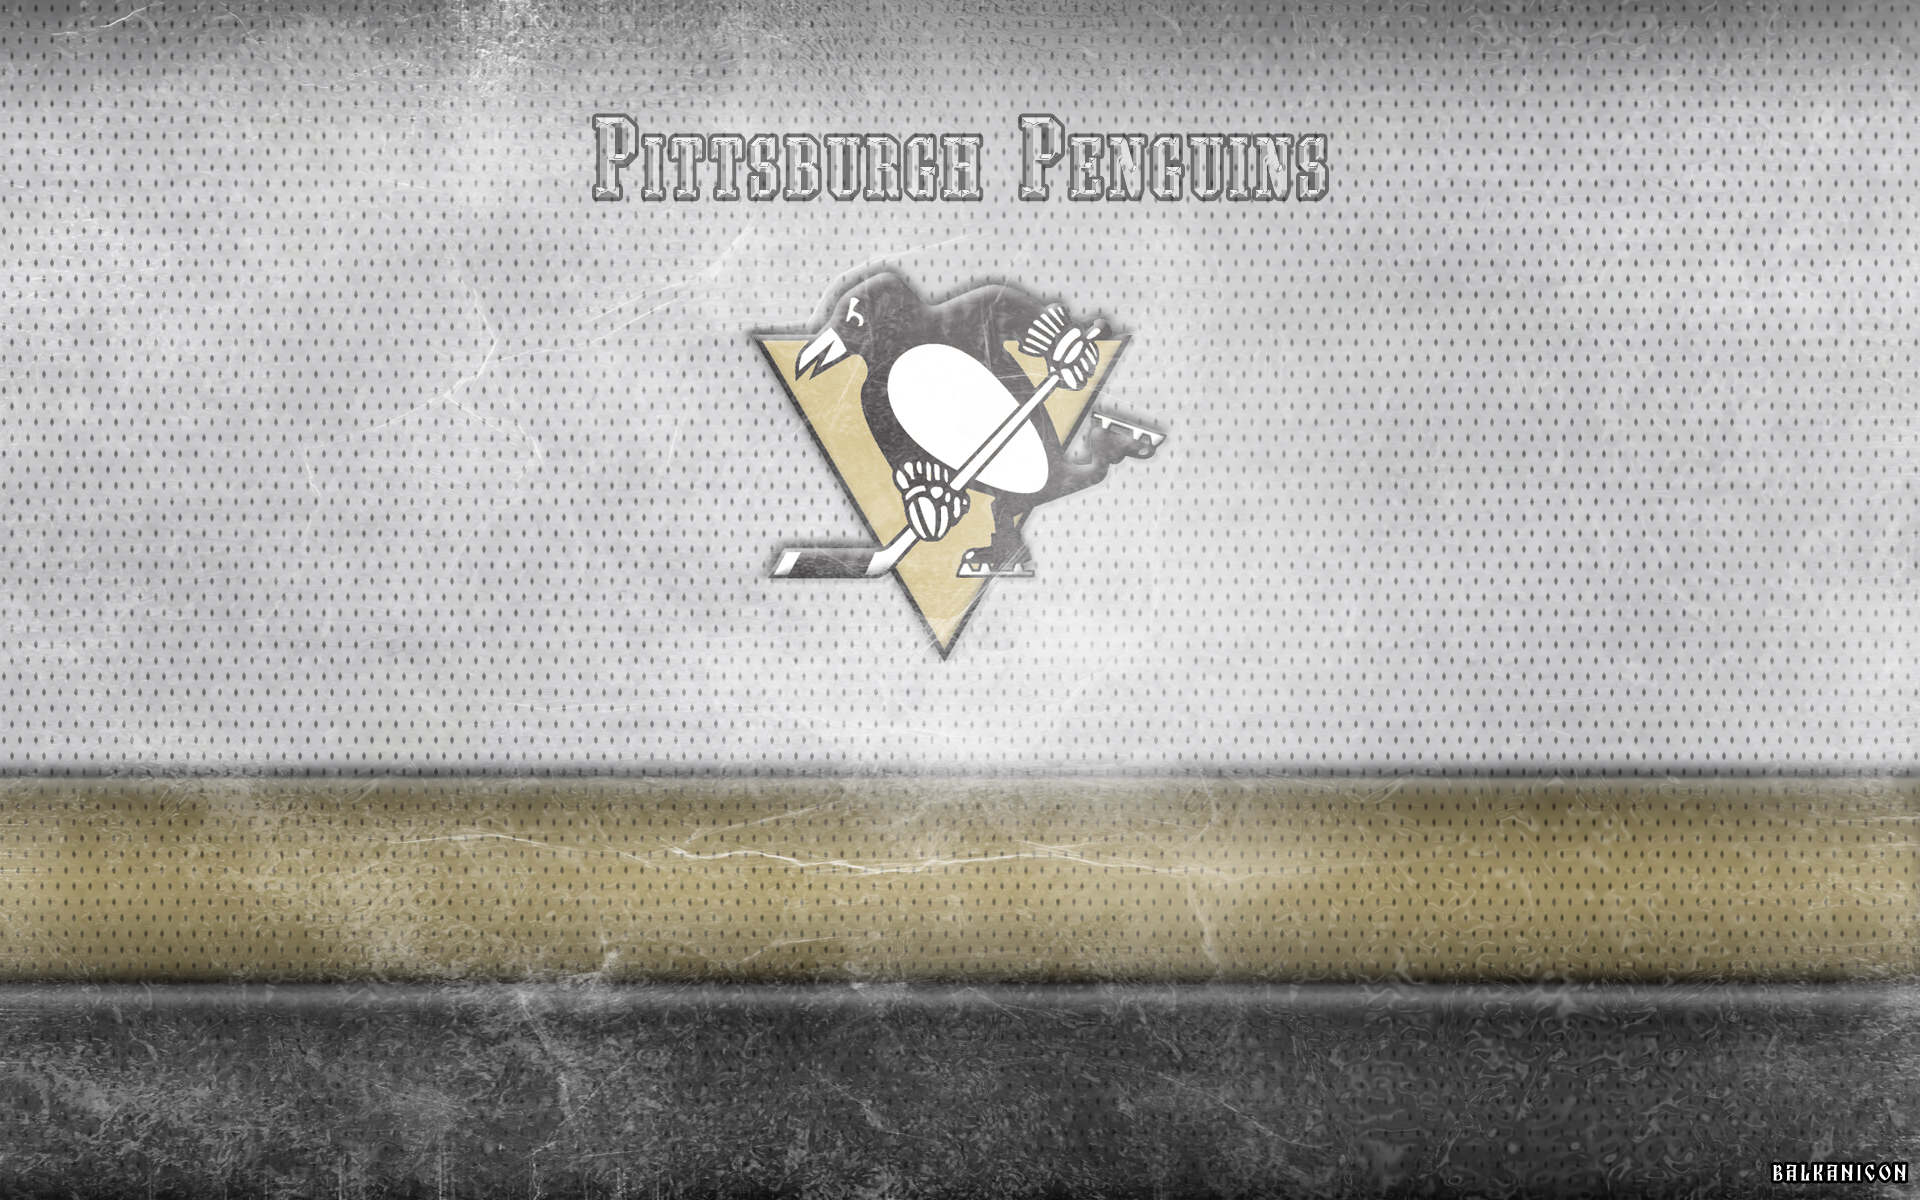 Pittsburgh Penguins wallpaper by Balkanicon on